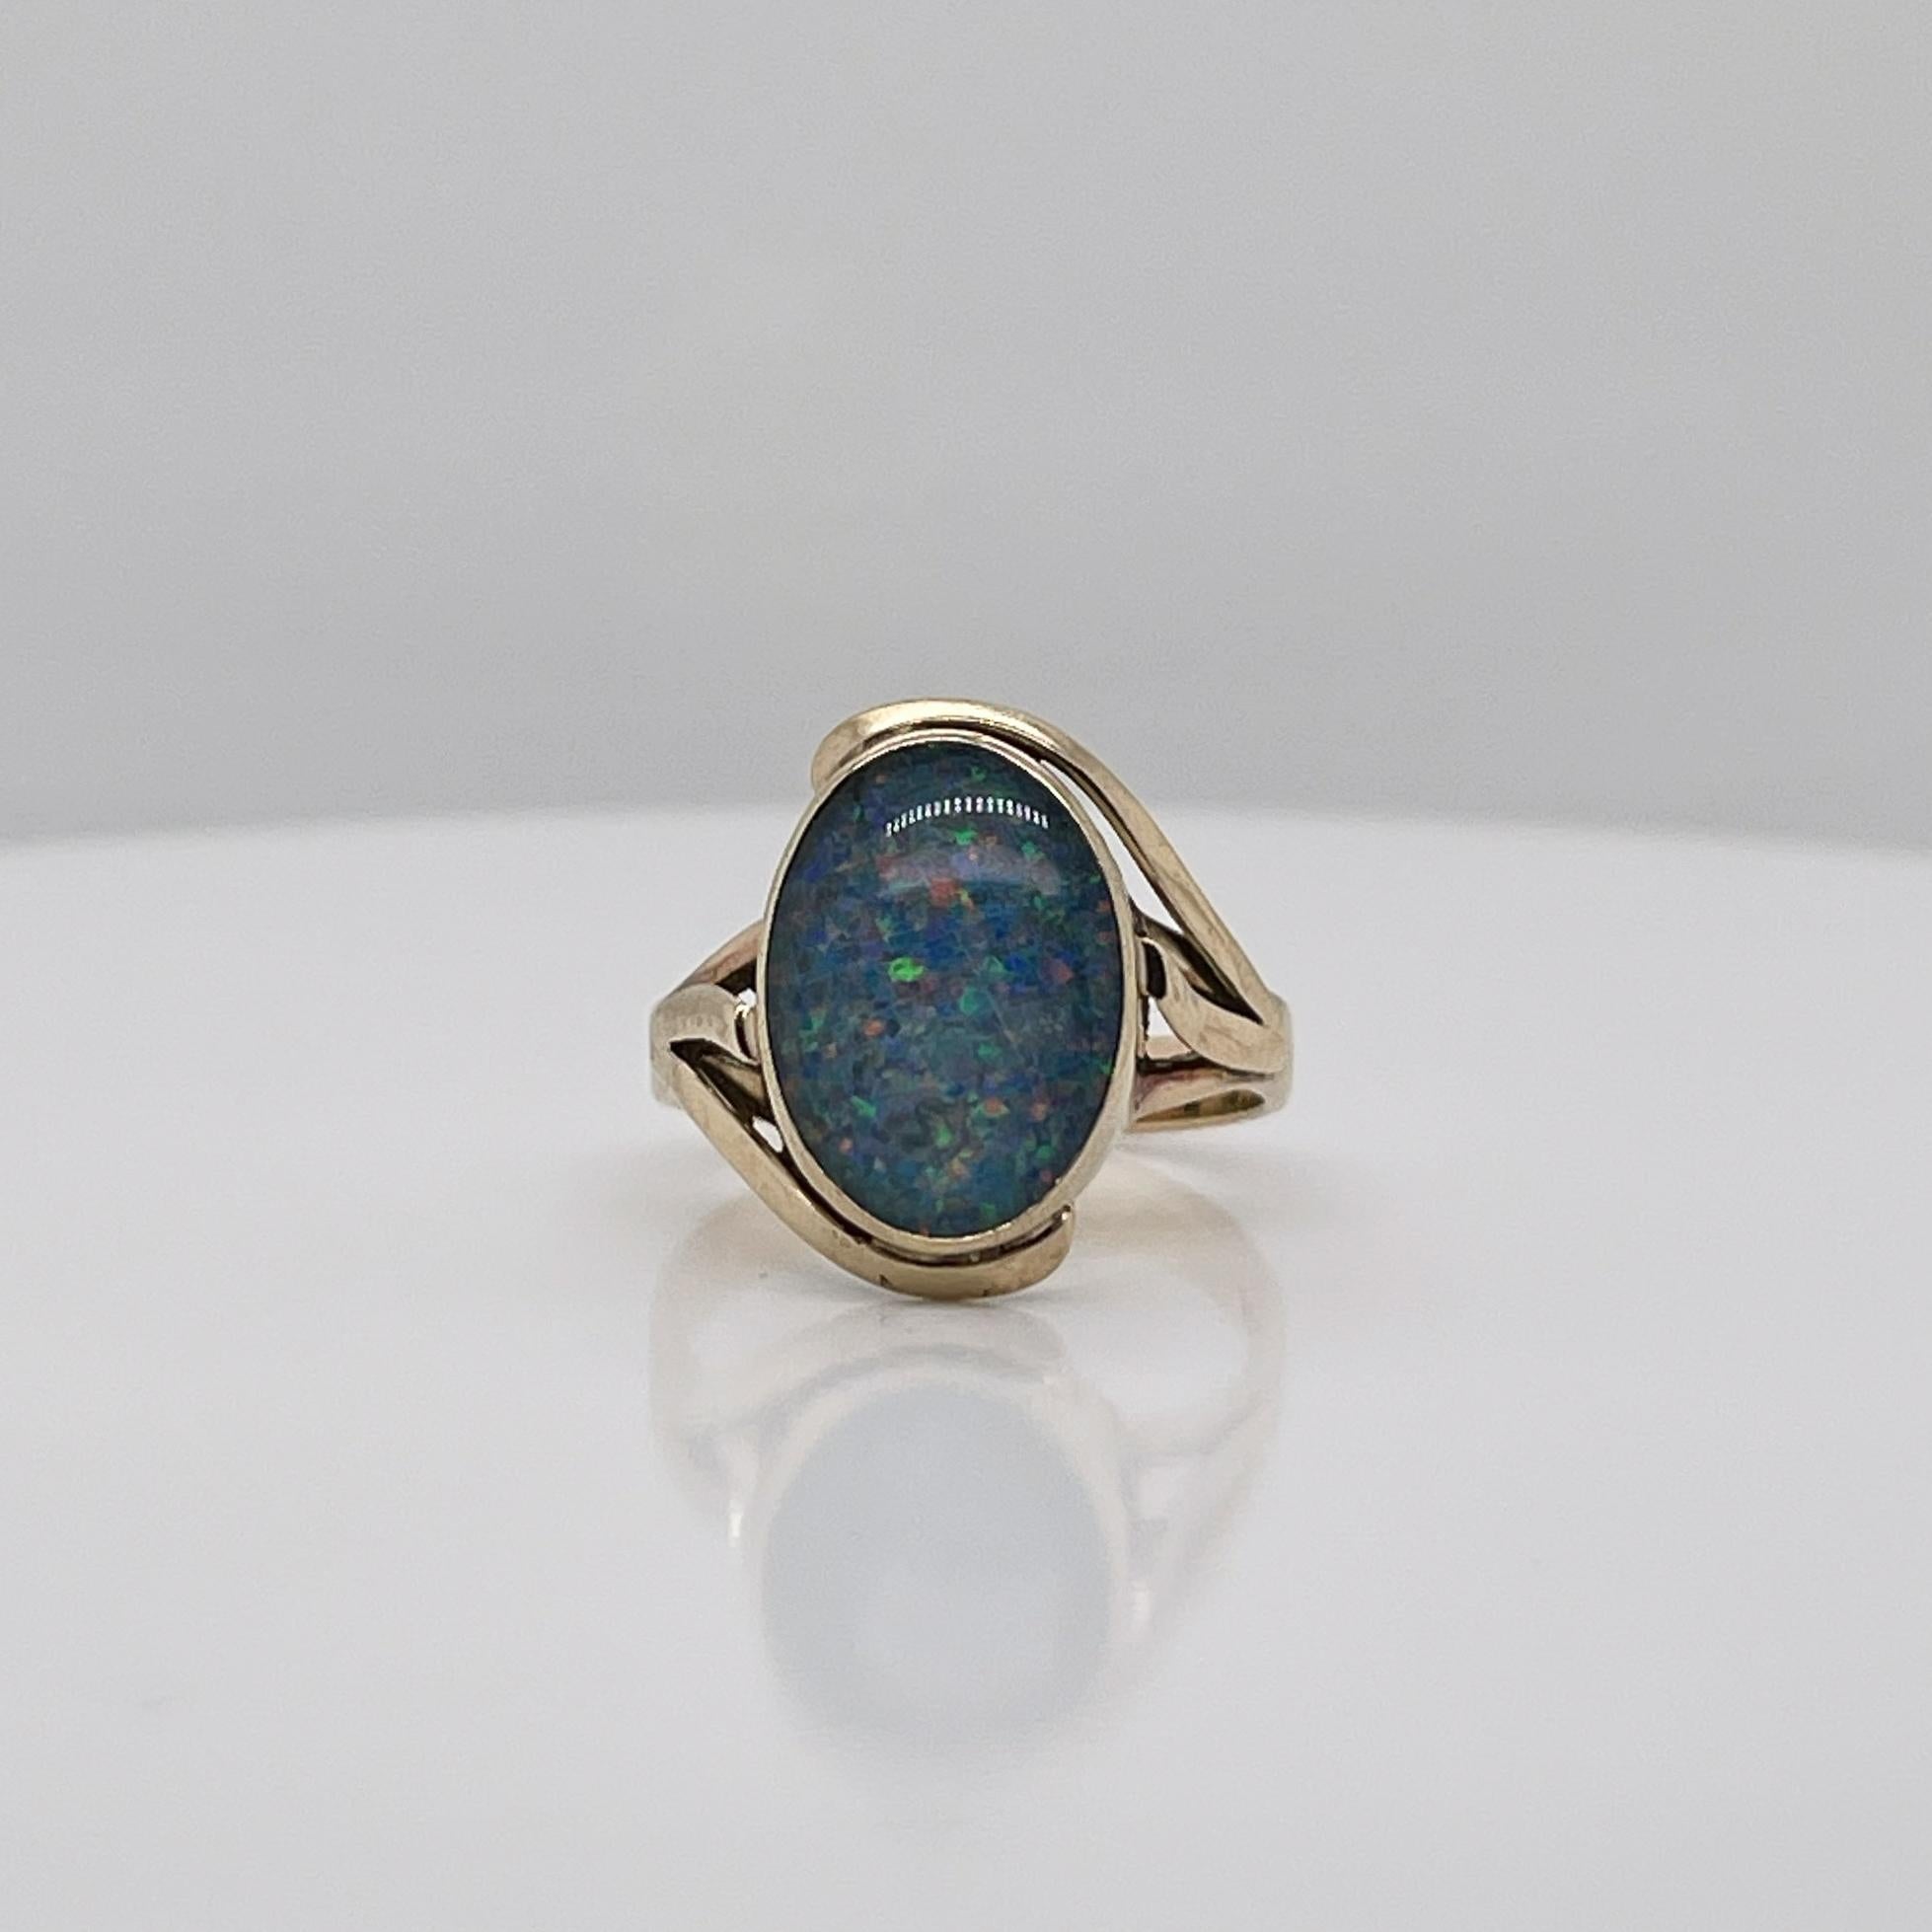 A very fine vintage gold and opal signet style ring.

With oval opal doublet cabochon bezel set in 9ct gold. 

Simply a great ring!

Date:
20th Century

Overall Condition:
It is in overall good, as-pictured, used estate condition with some very fine